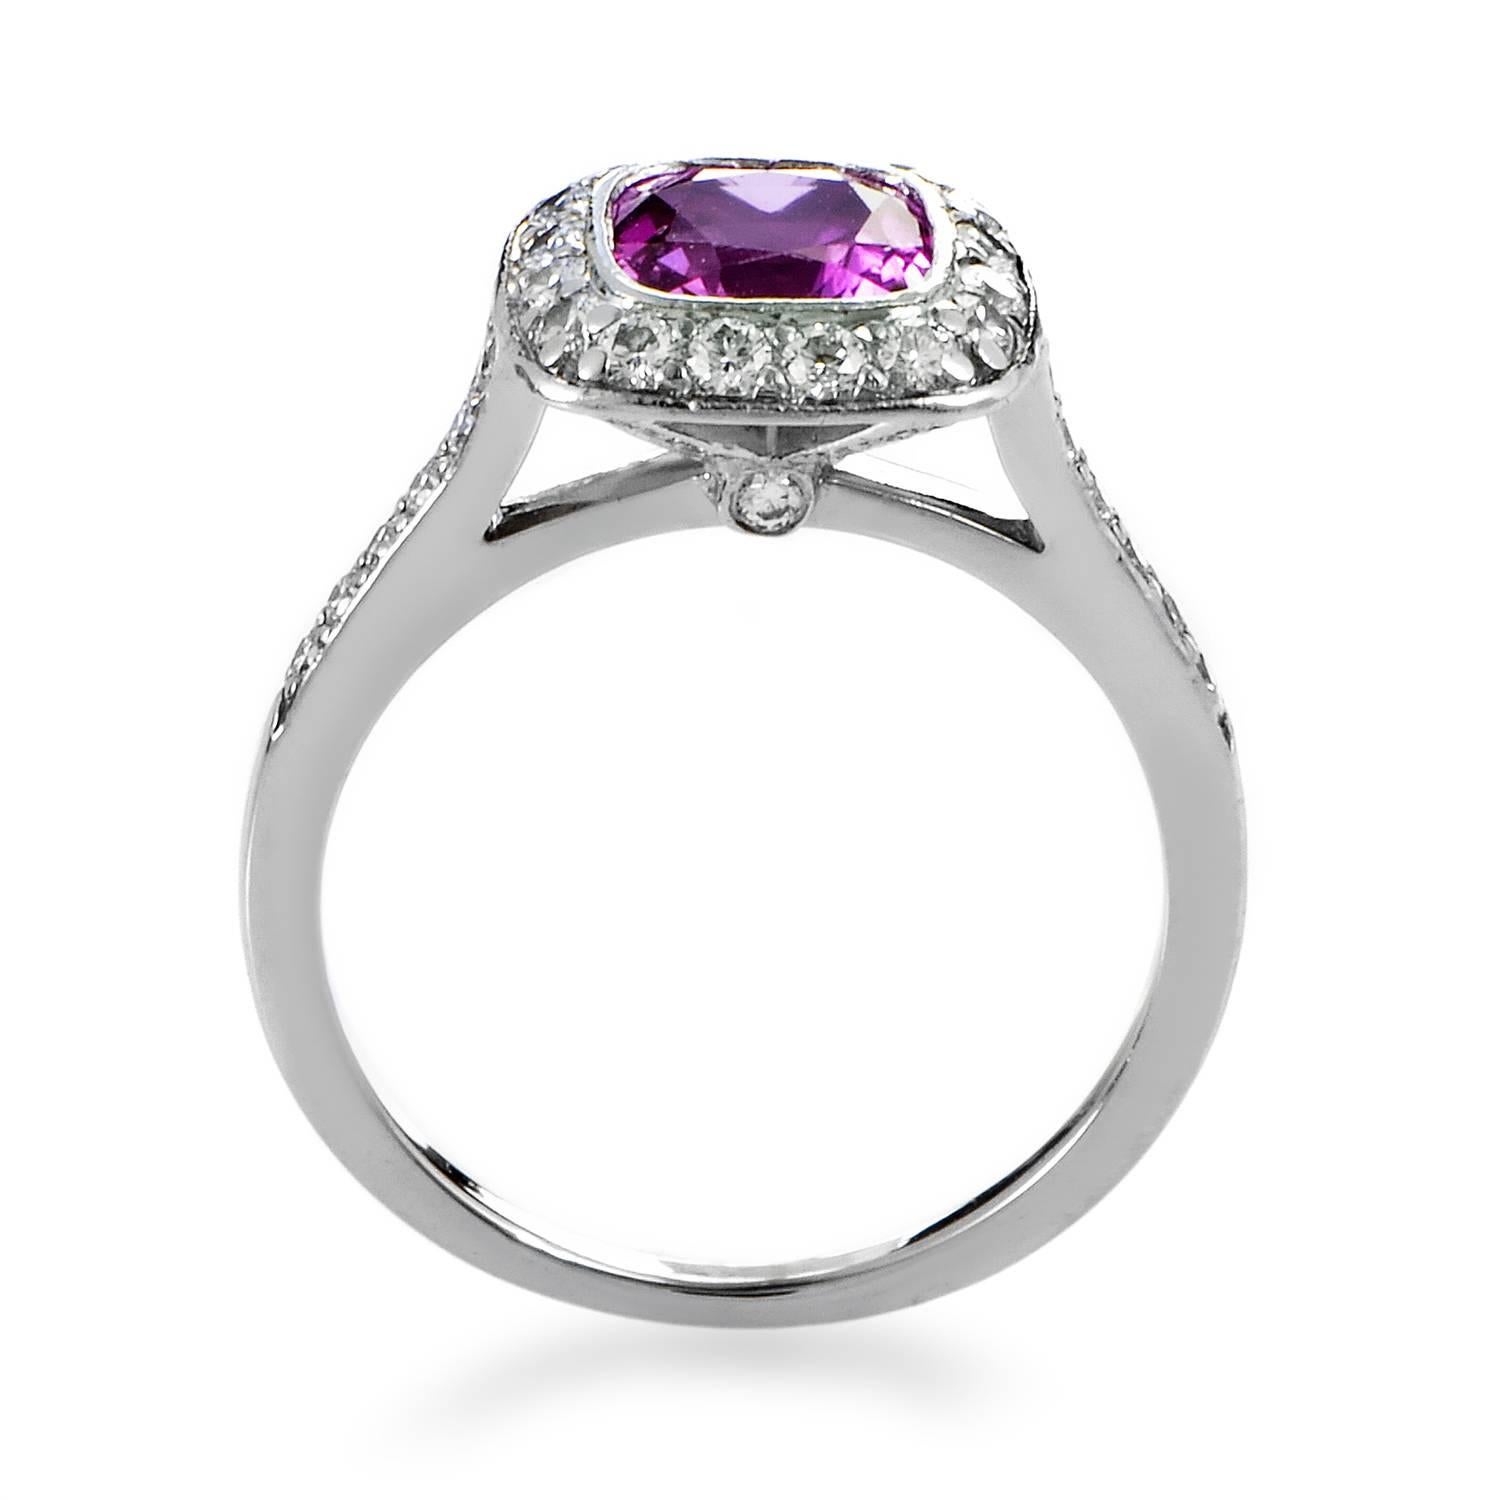 To create a pedestal worthy of the delightfully glistening pink sapphire weighing approximately 1.25 carats, the graceful body of this ring from Tiffany & Co. is made of gleaming platinum and adorned with 0.74ct of sparkling diamonds.
Ring Size: